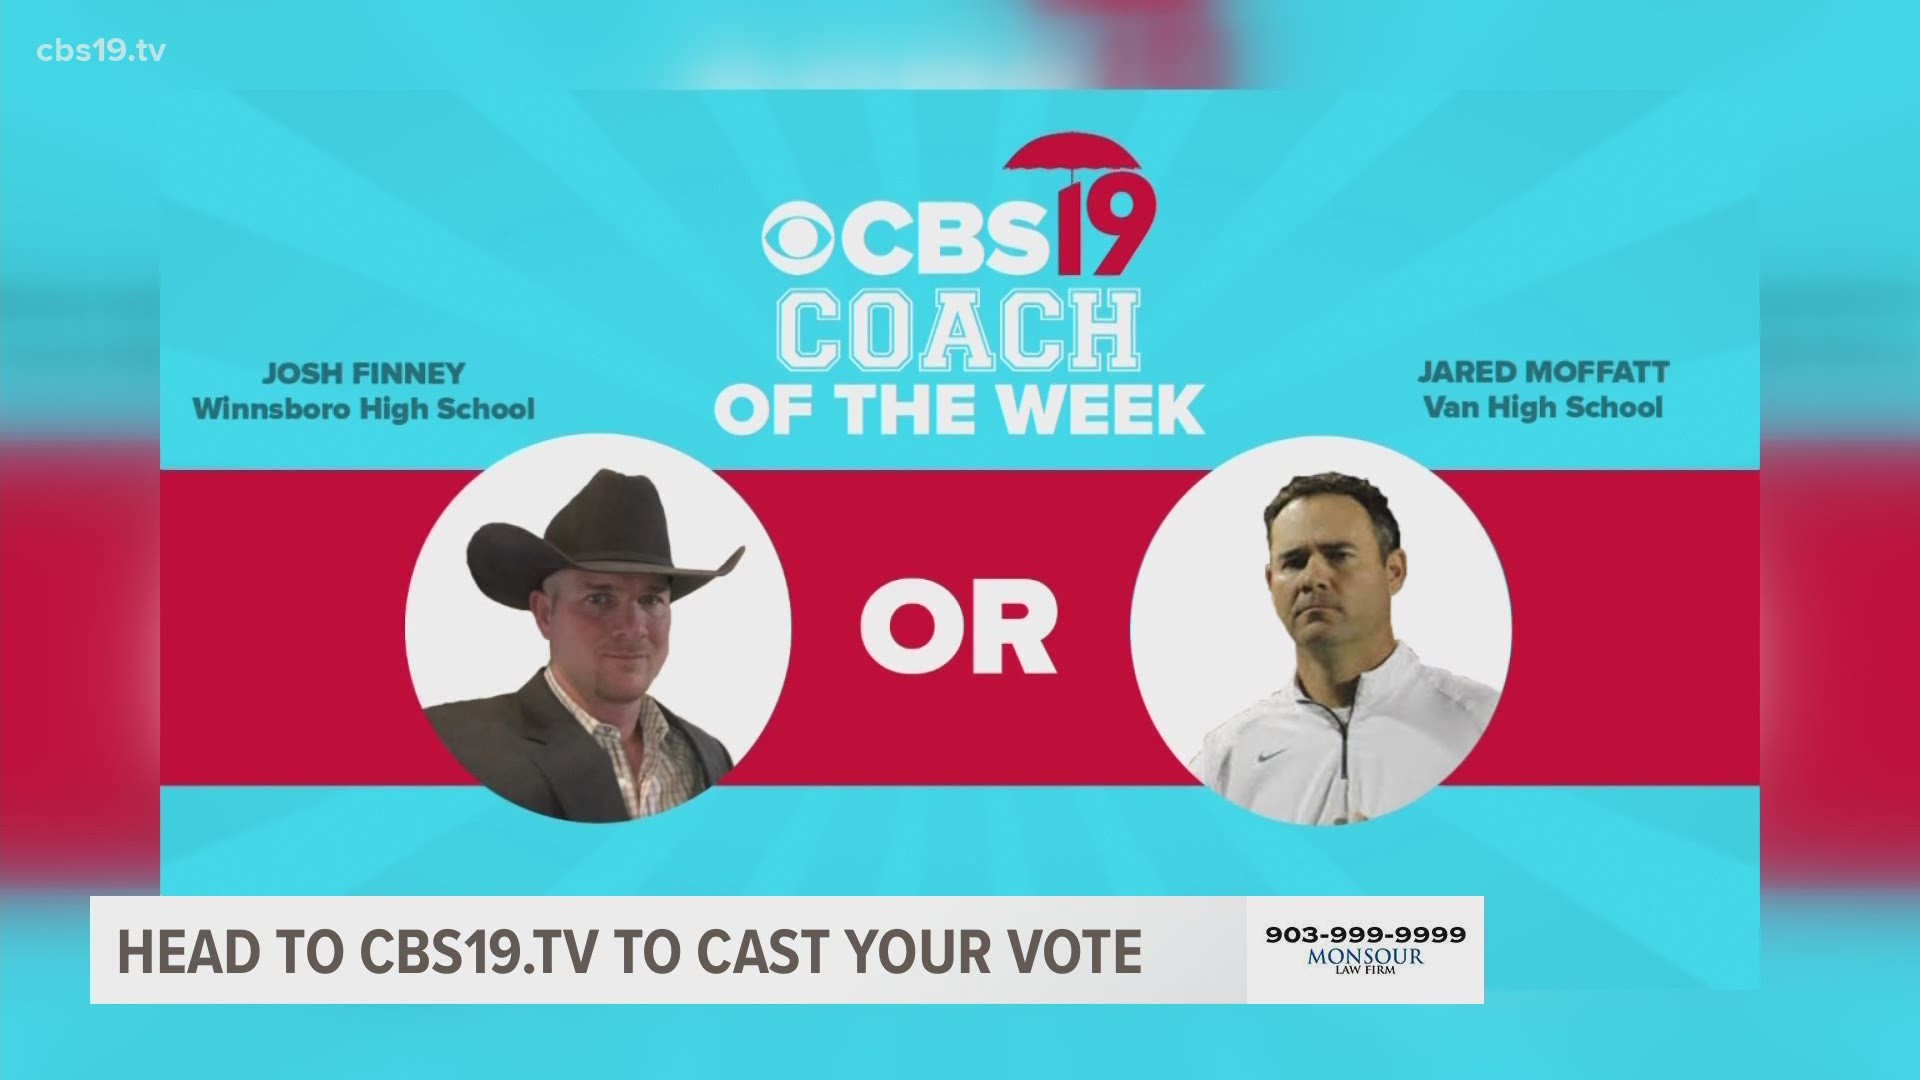 Vote now through Wednesday, Nov. 18, at 11:59 p.m. The winner will be announced Thursday, Nov. 19, on CBS19 News at 6 p.m.!